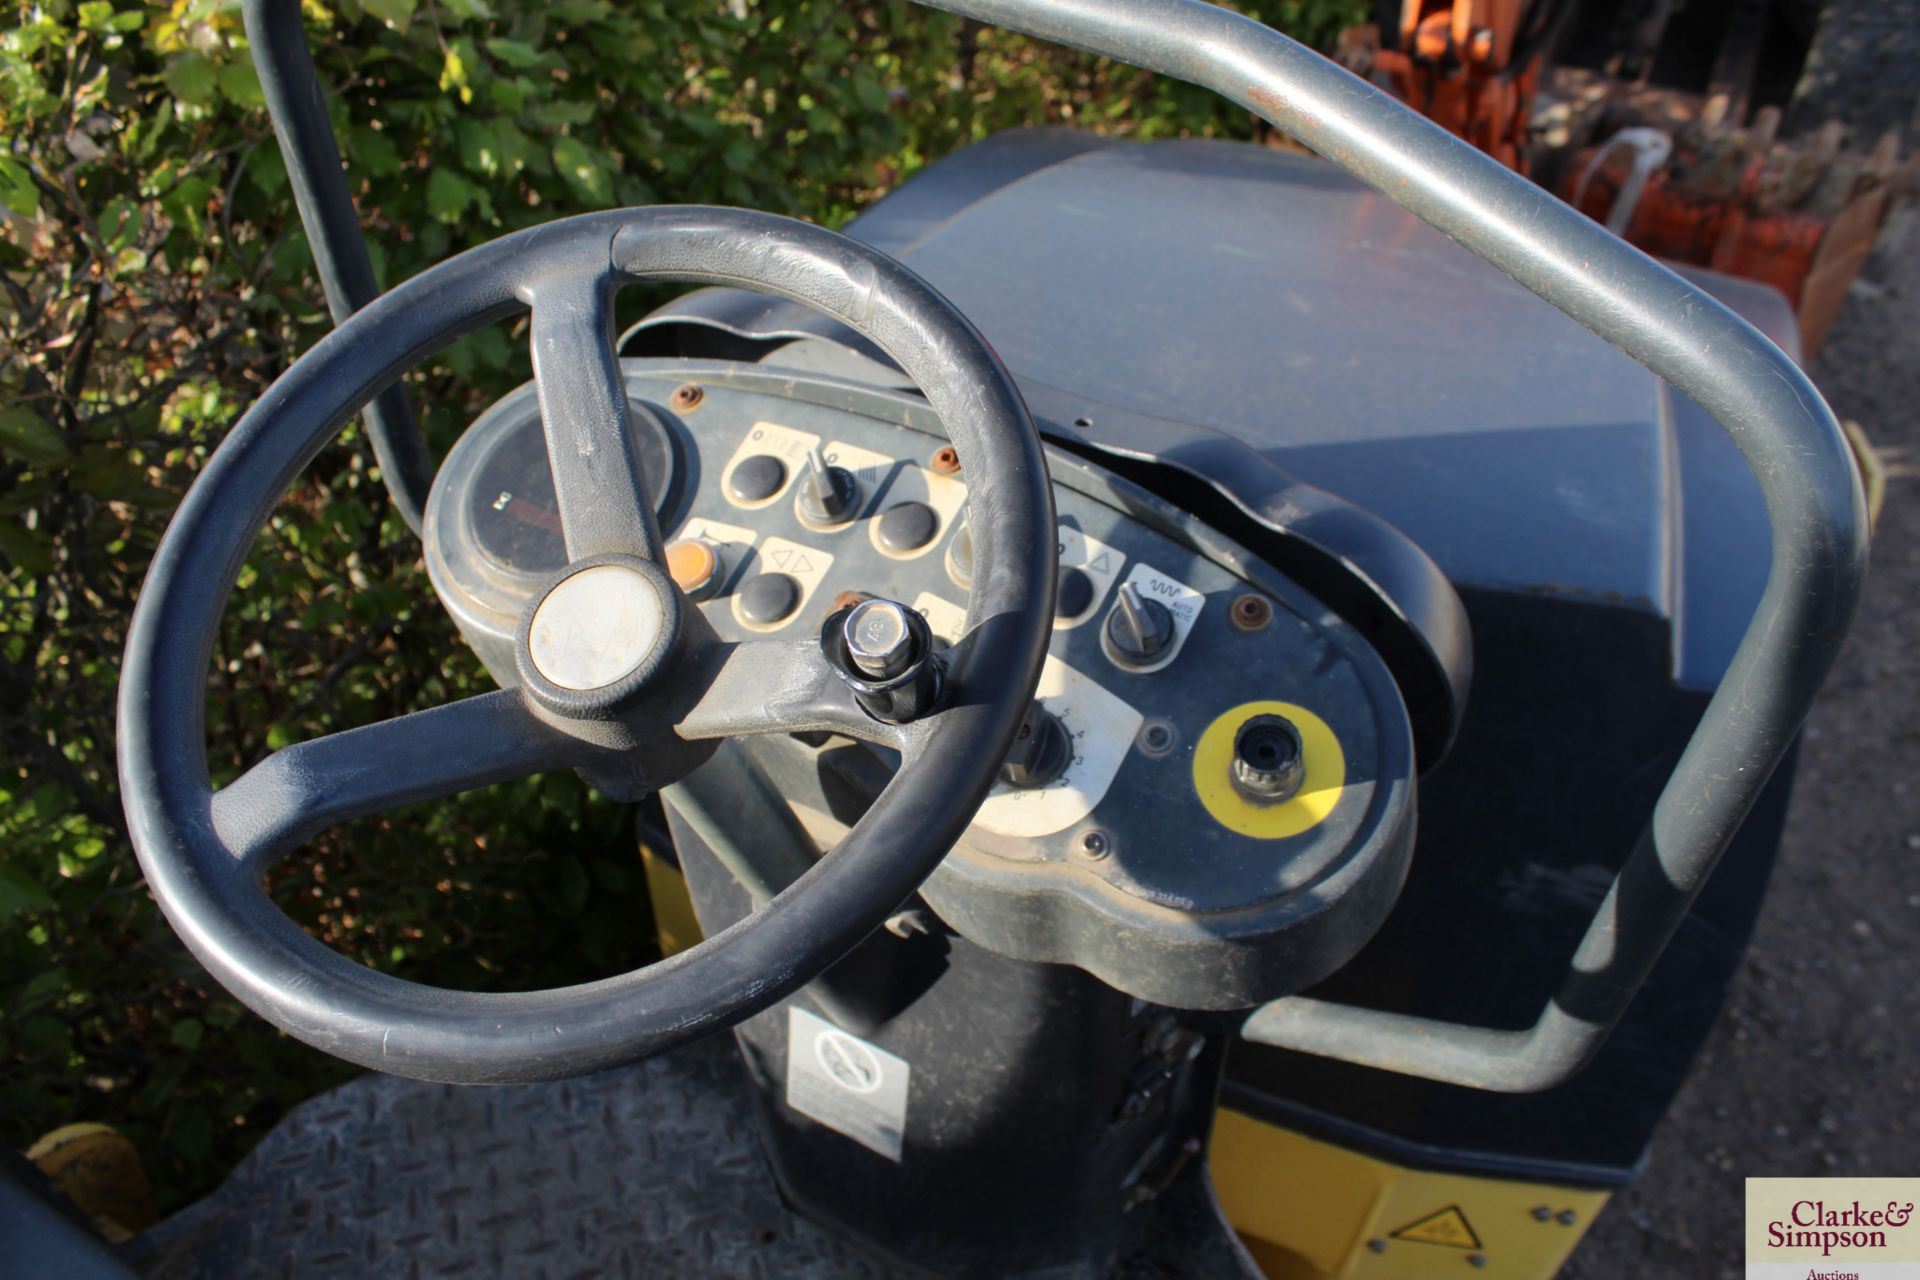 Bomag BW 120 AD-4 double drum roller. 2007. 1,346 hours. Serial number 101880024620. Owned from new. - Image 10 of 11